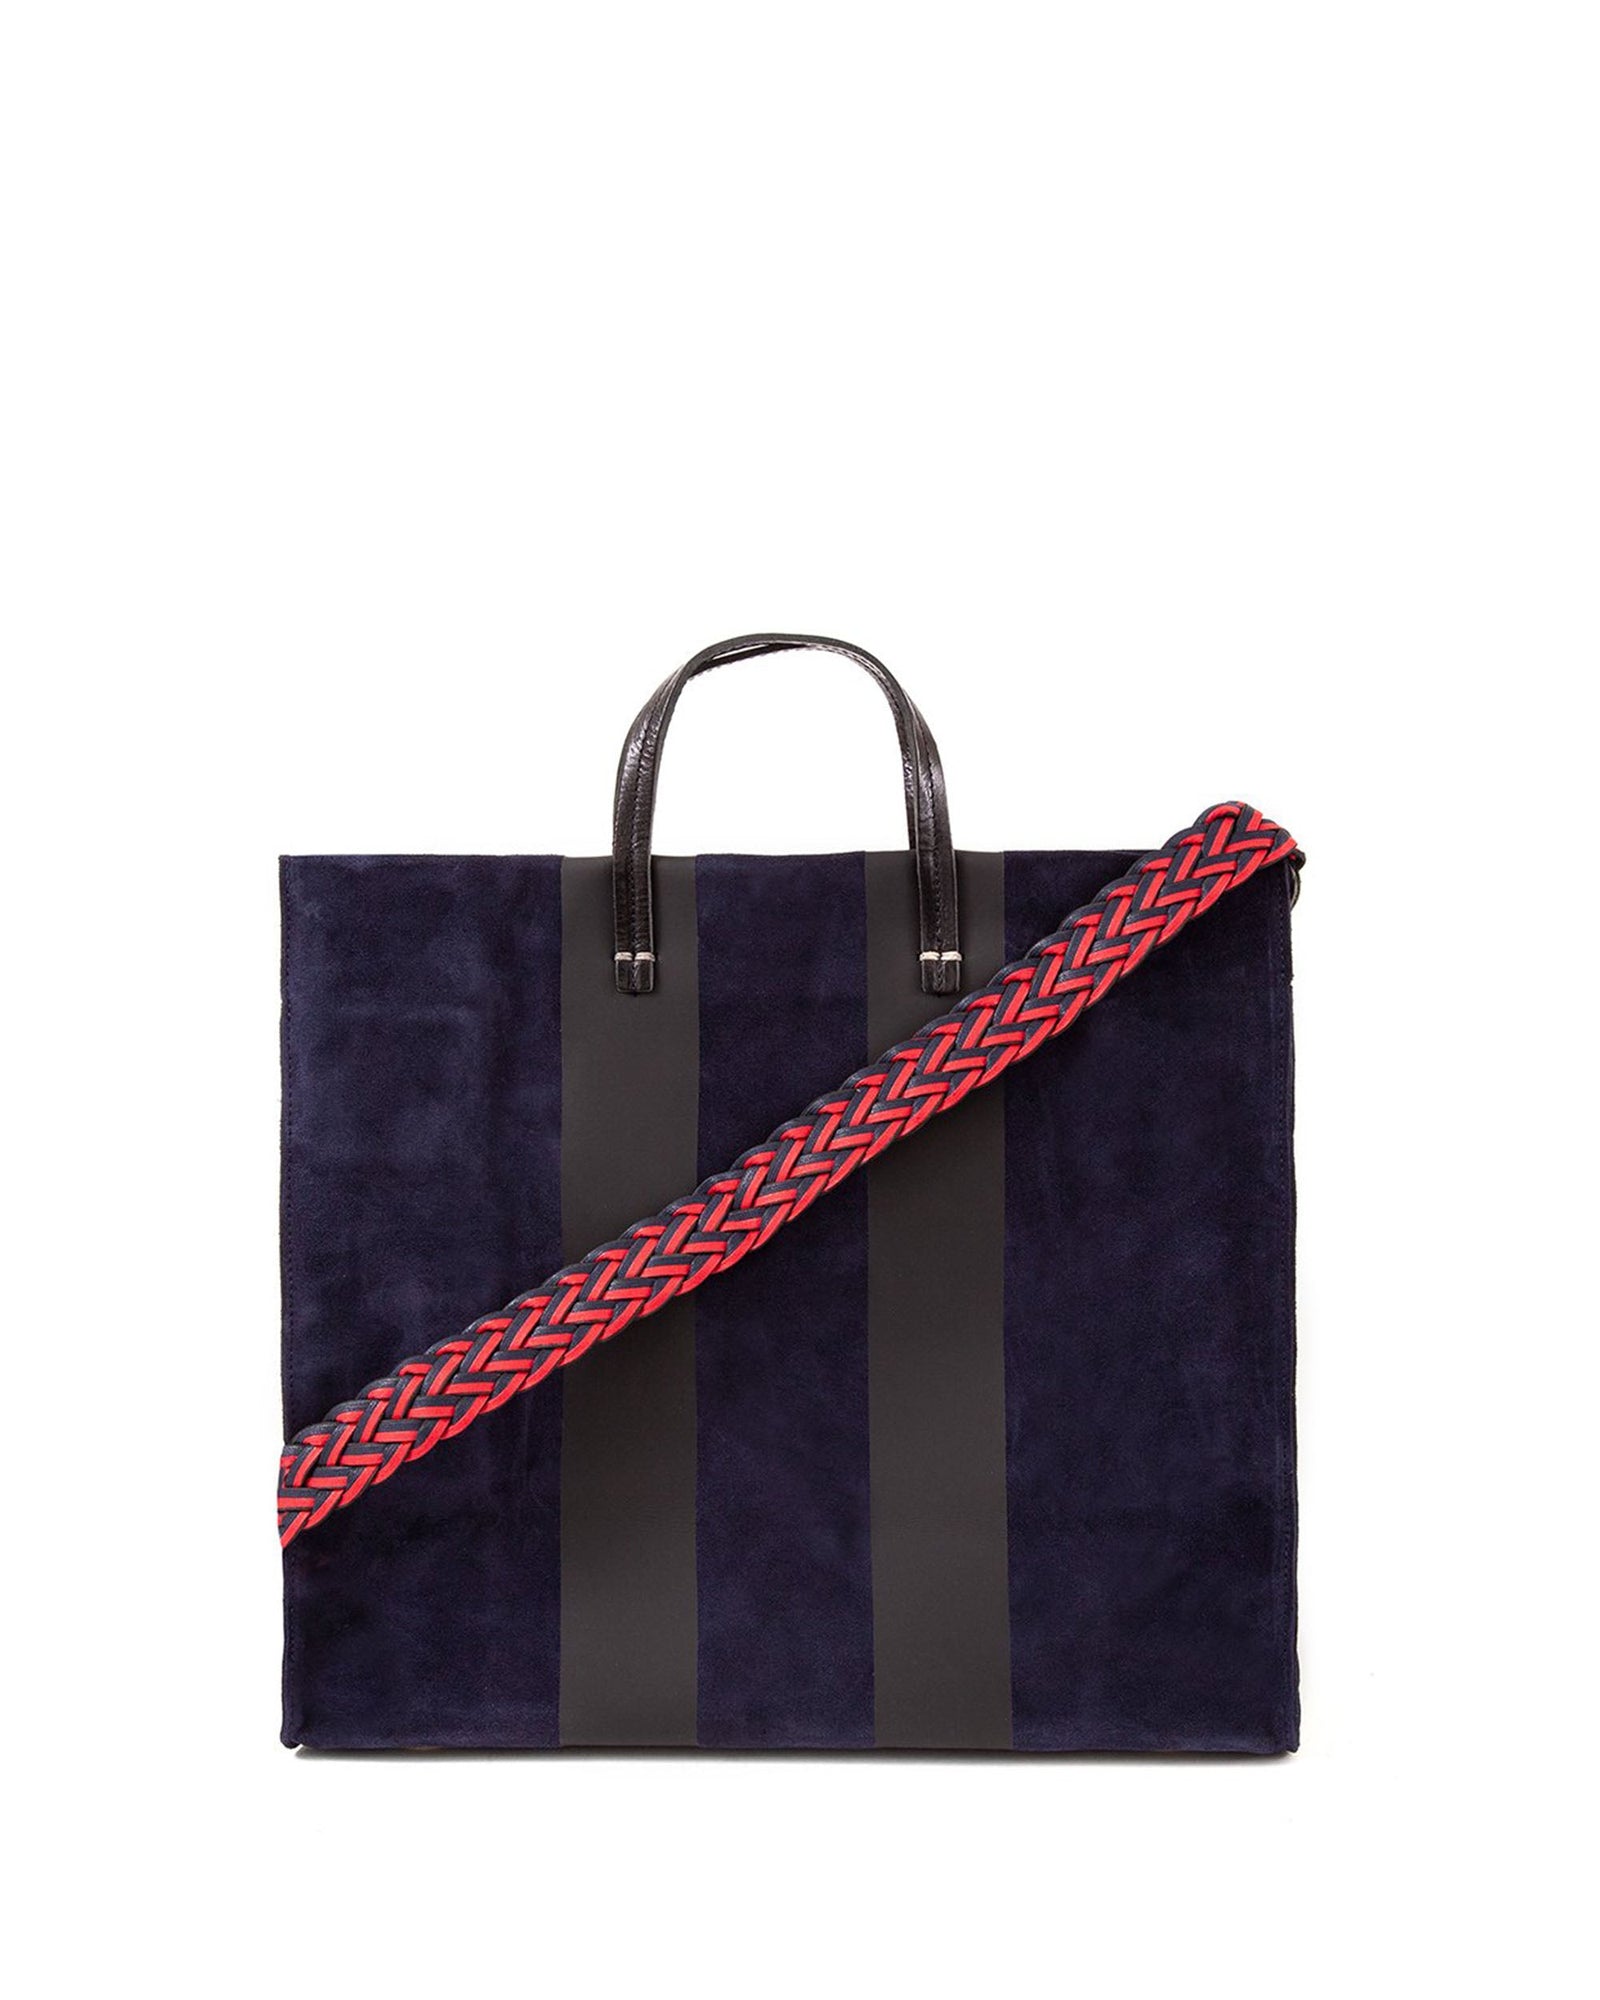 Simple Tote in Navy Suede with Racing Stripes with Red & Navy Braided Shoulder Strap